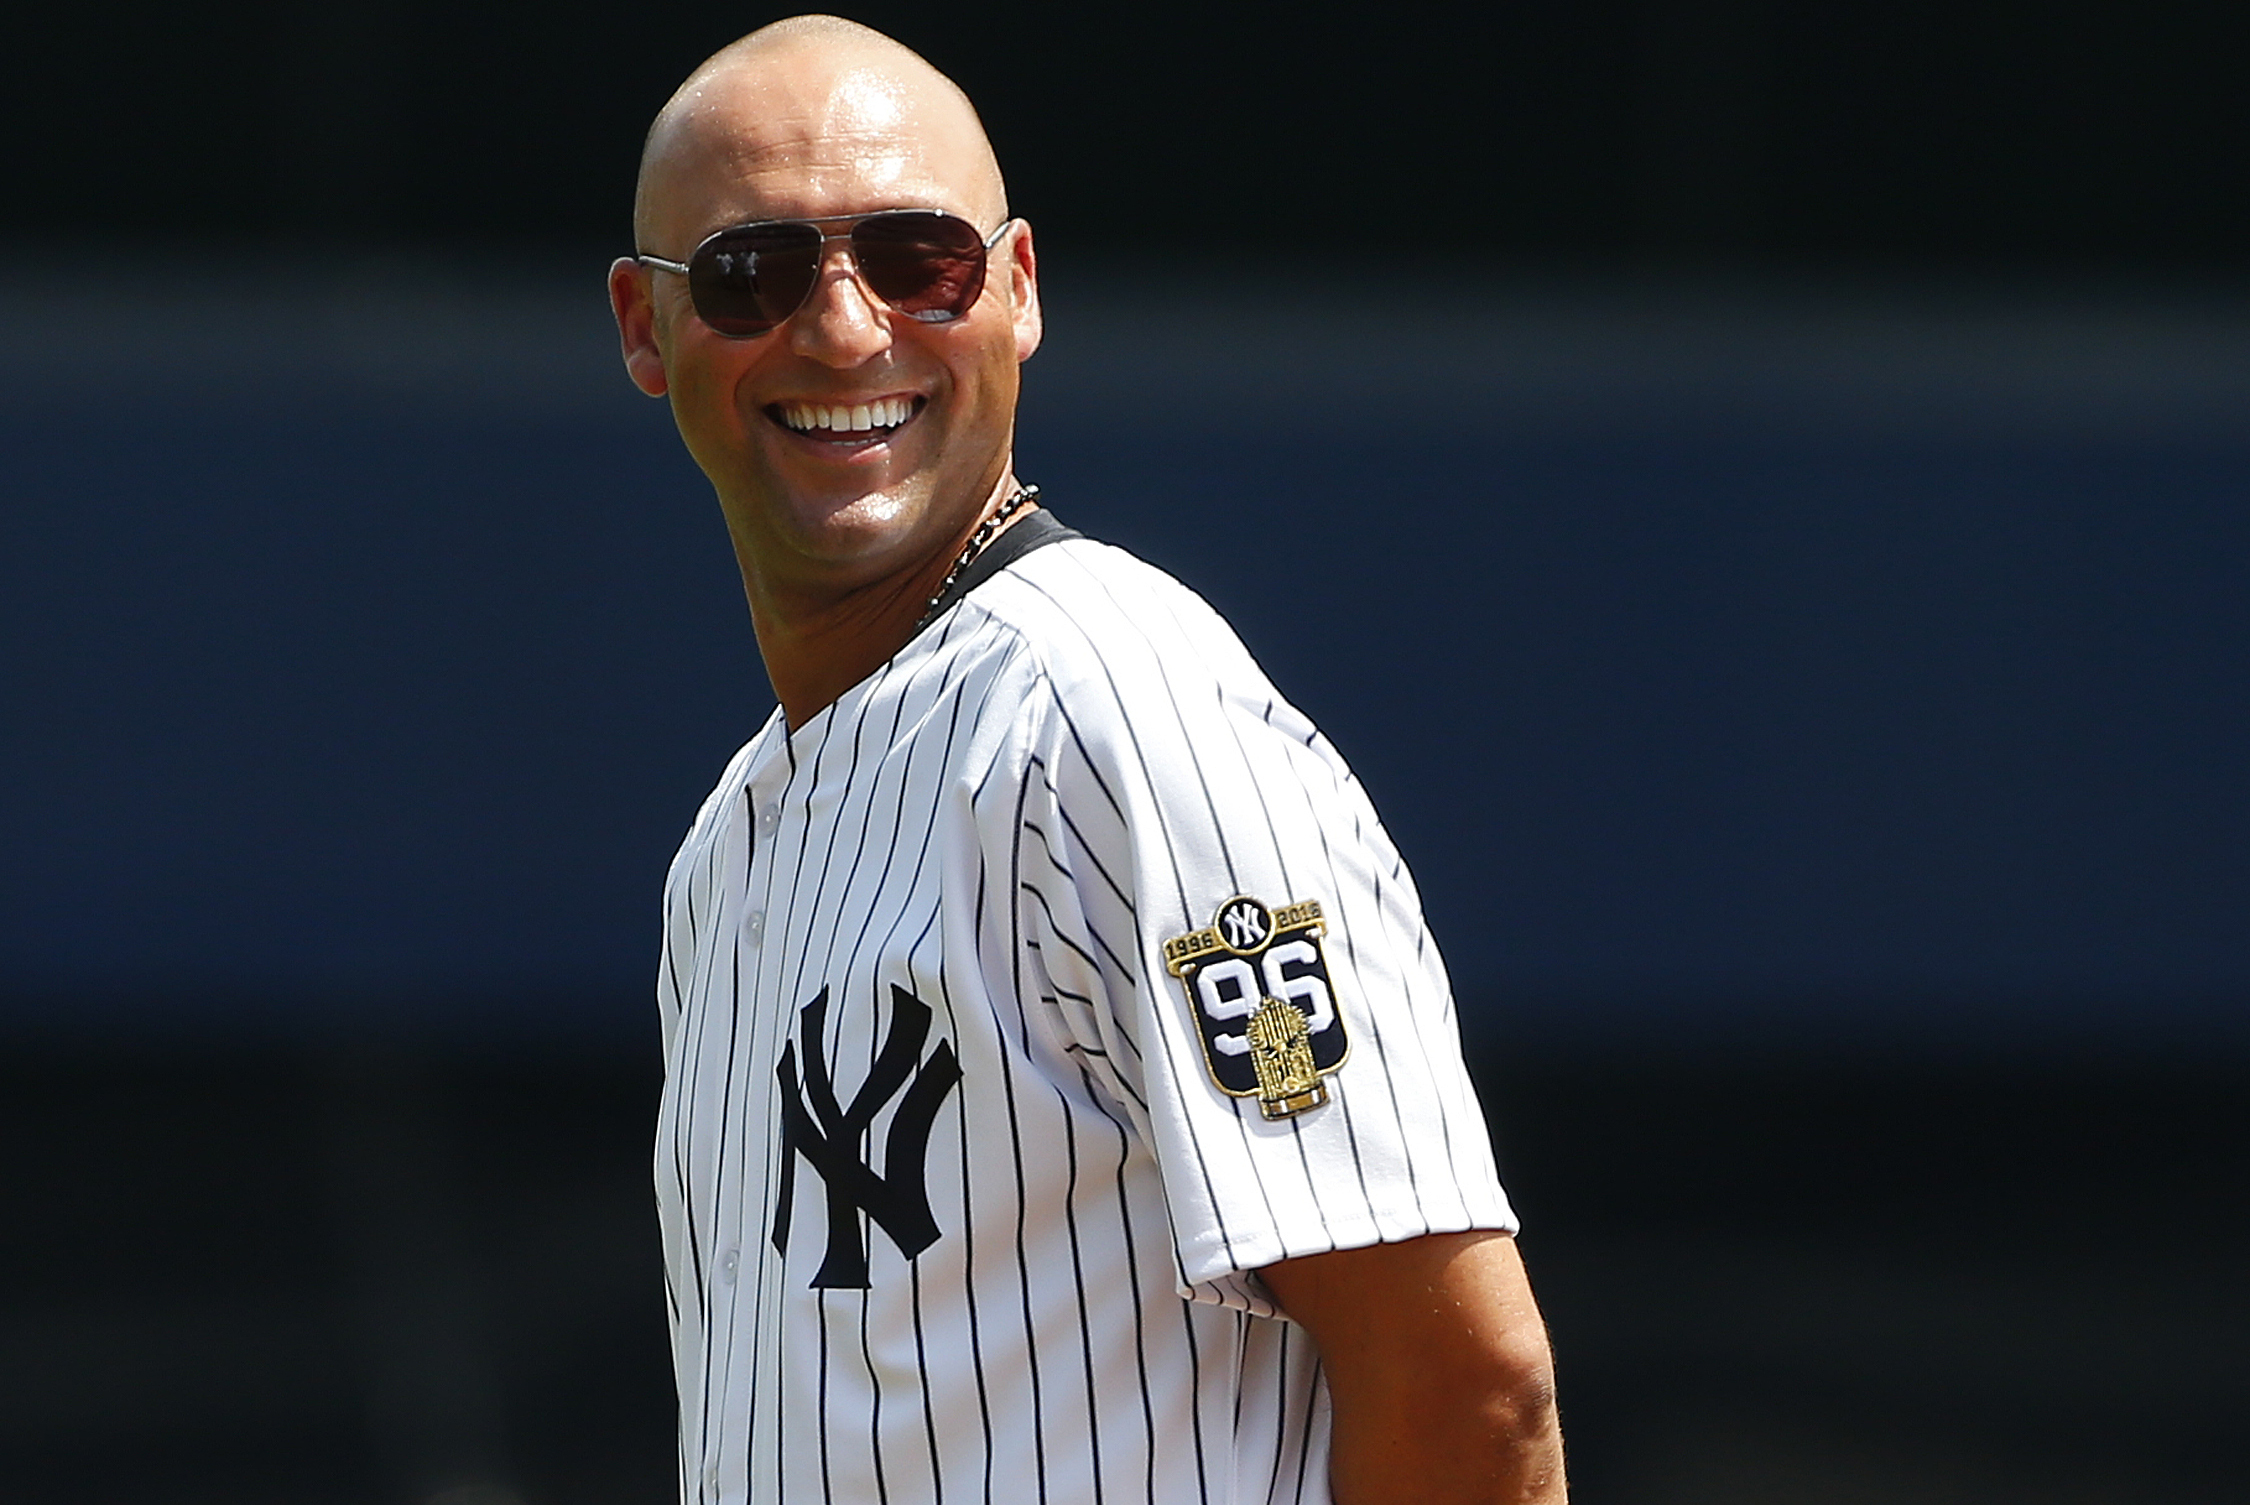 Derek Jeter's Jersey Number to Be Retired by Yankees: Latest